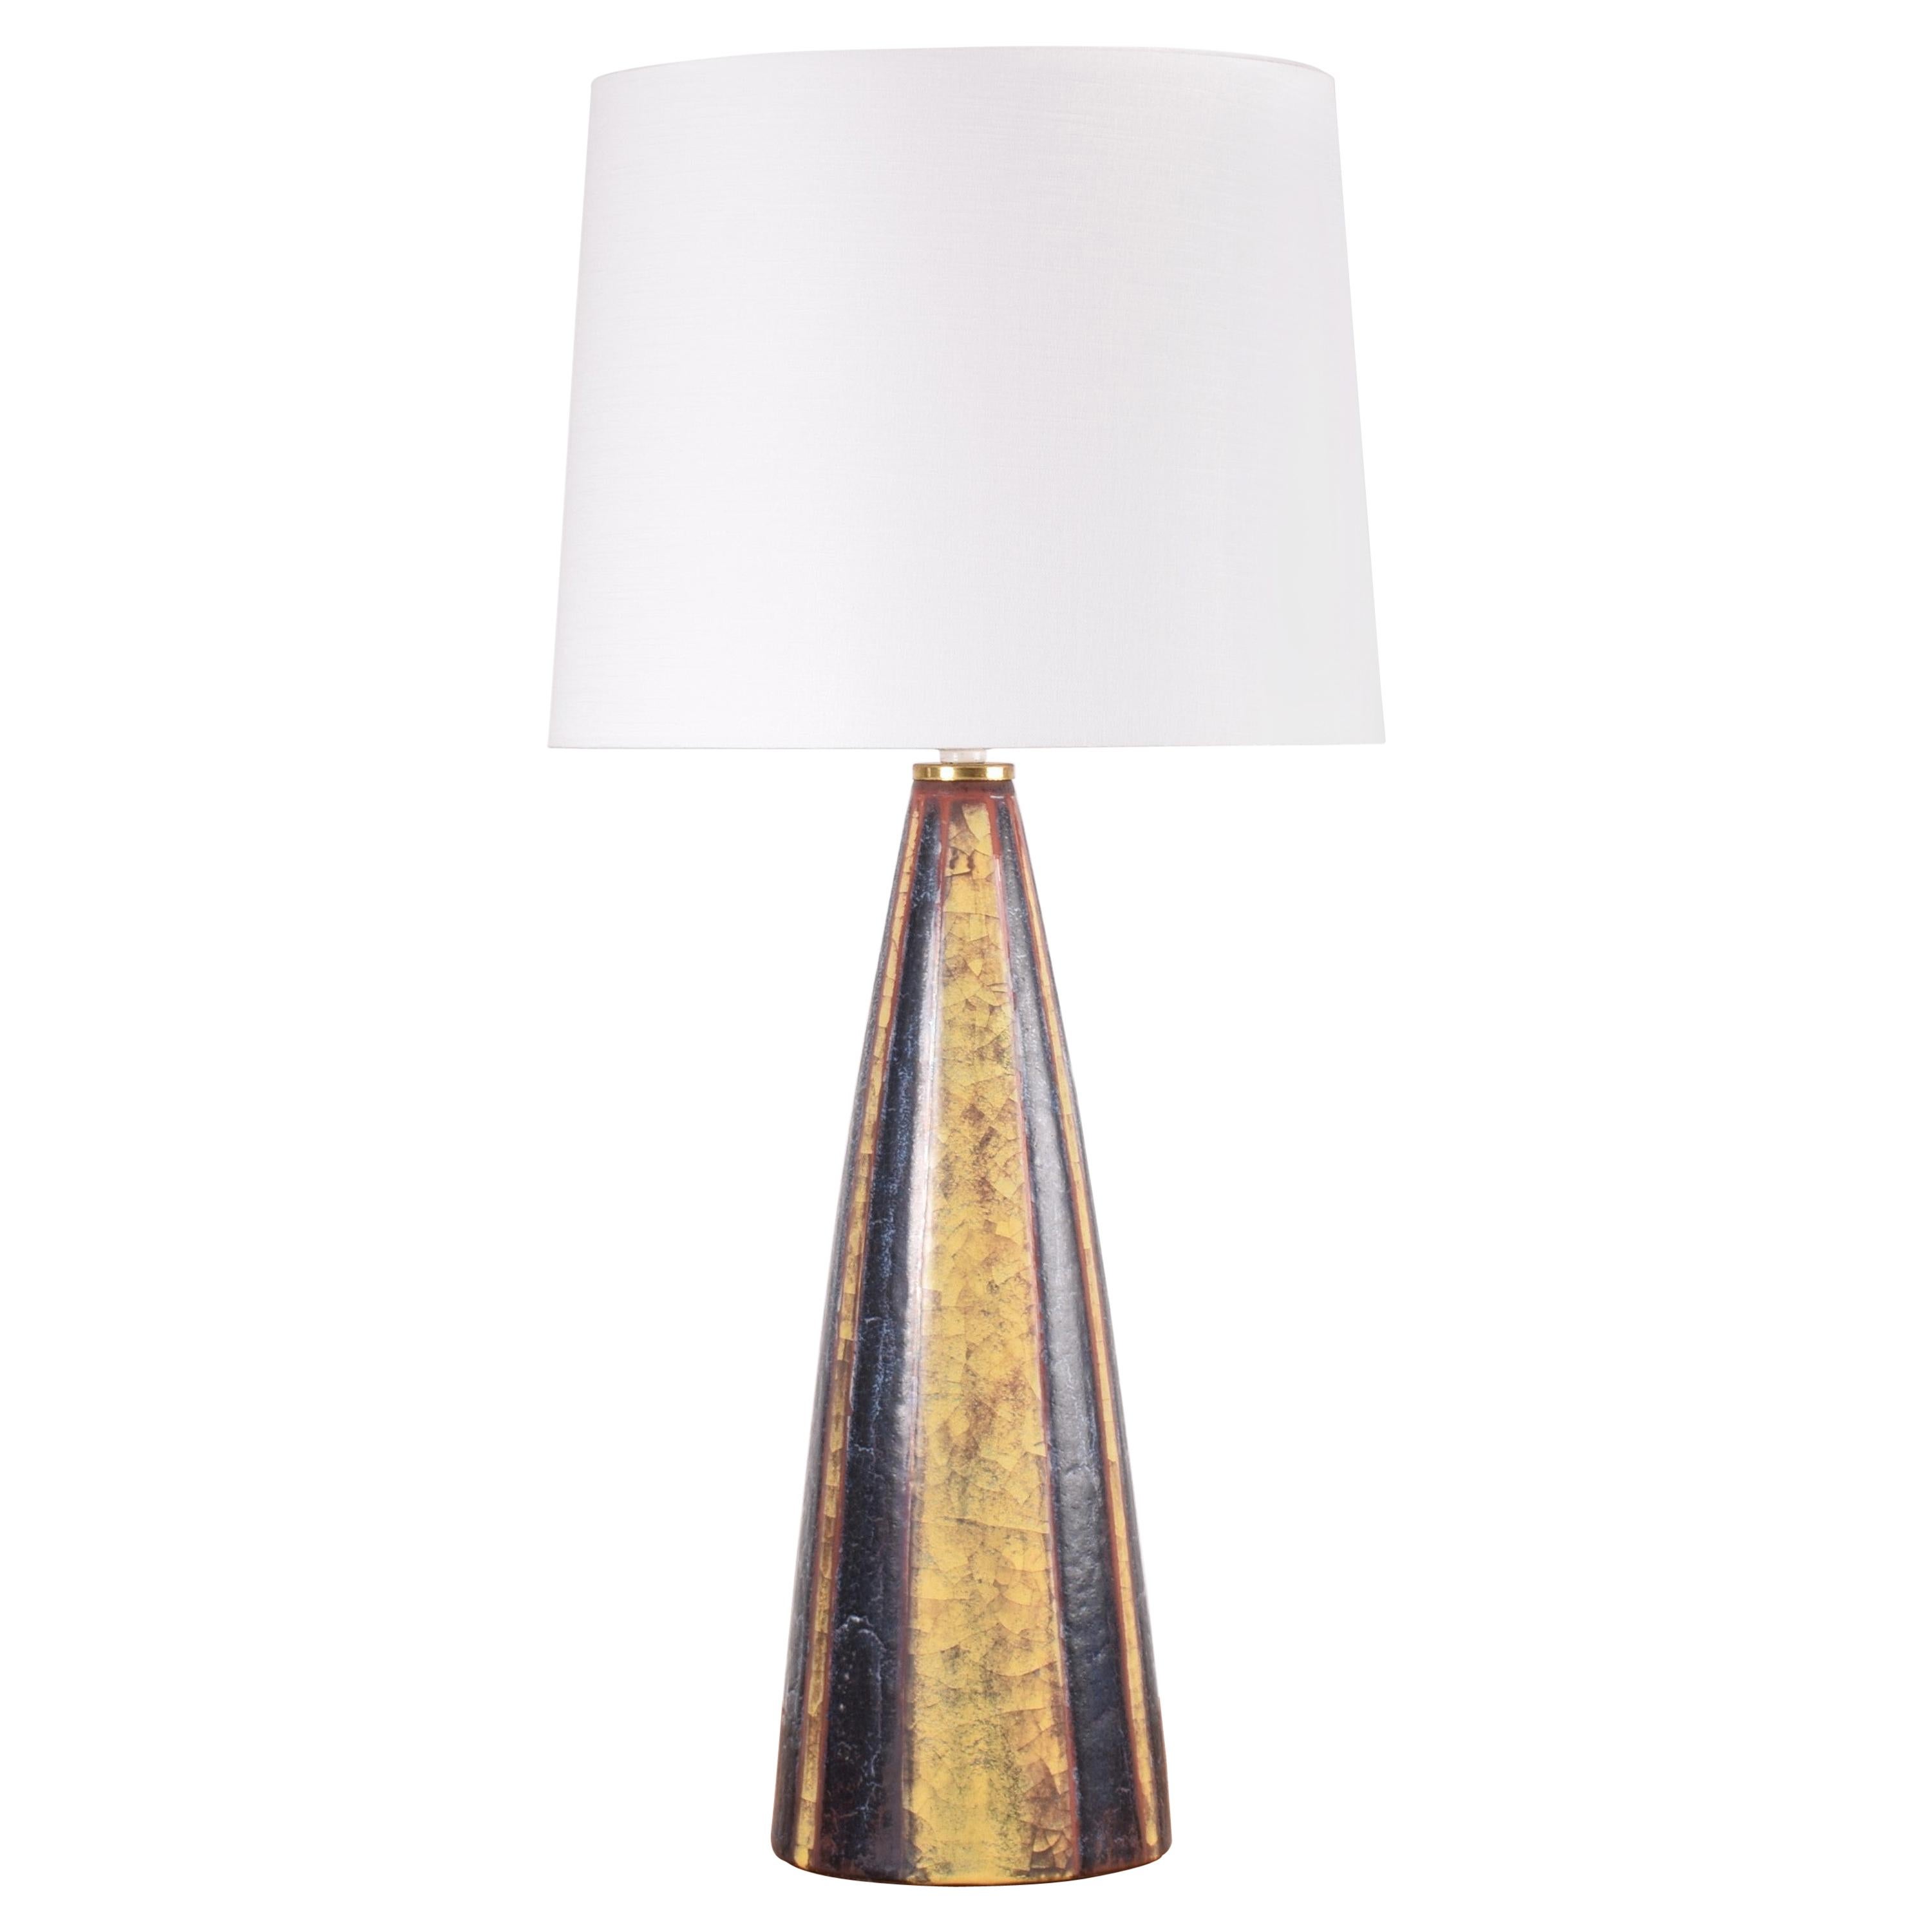 32" Tall Danish Modern Conical Ceramic Table Lamp by Michael Andersen & Son 1960